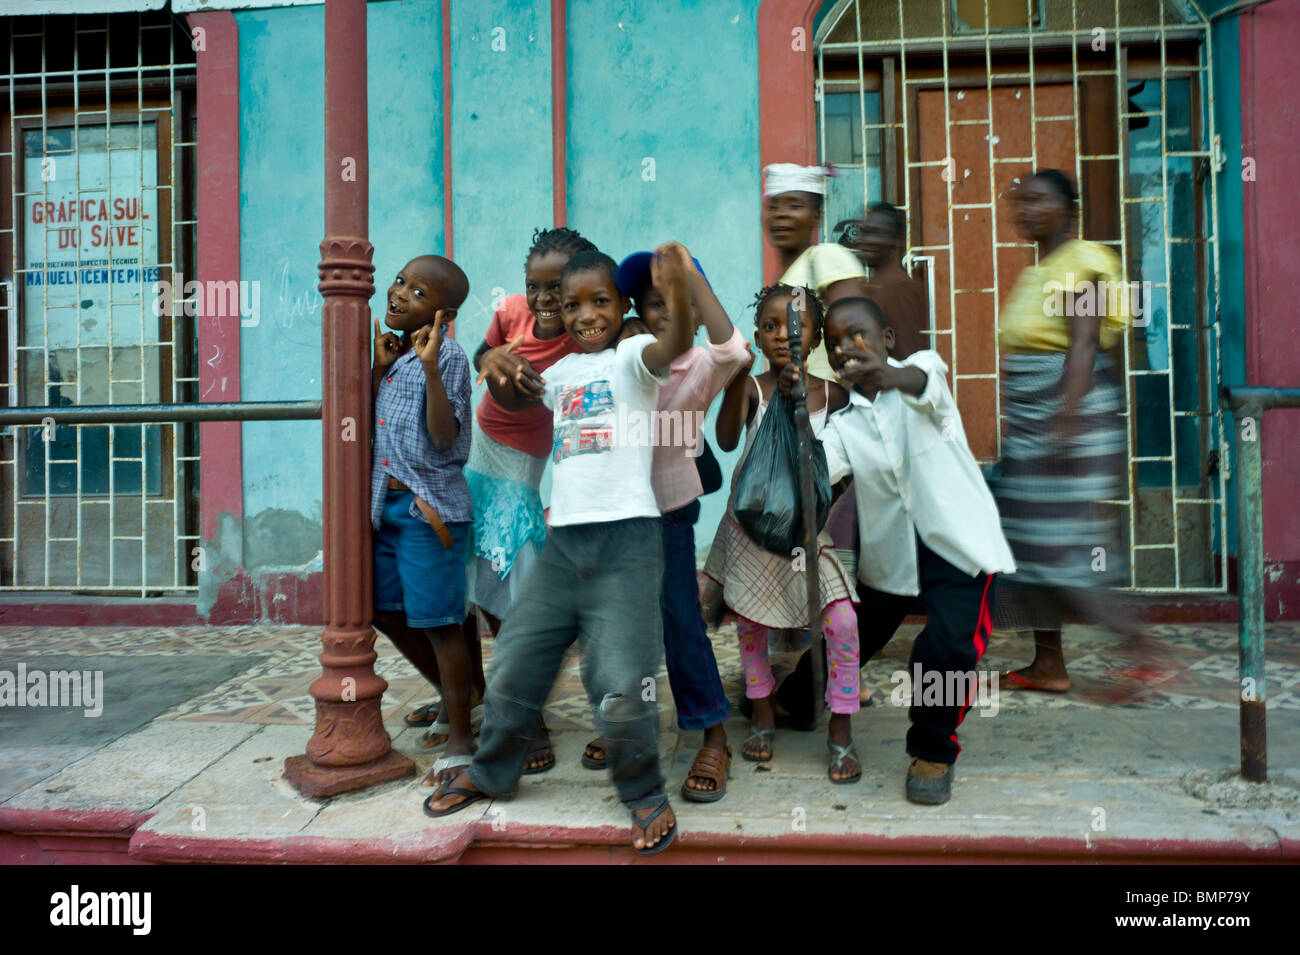 Children in the street in front of a typography store in Inhambane, Mozambique, Africa Stock Photo